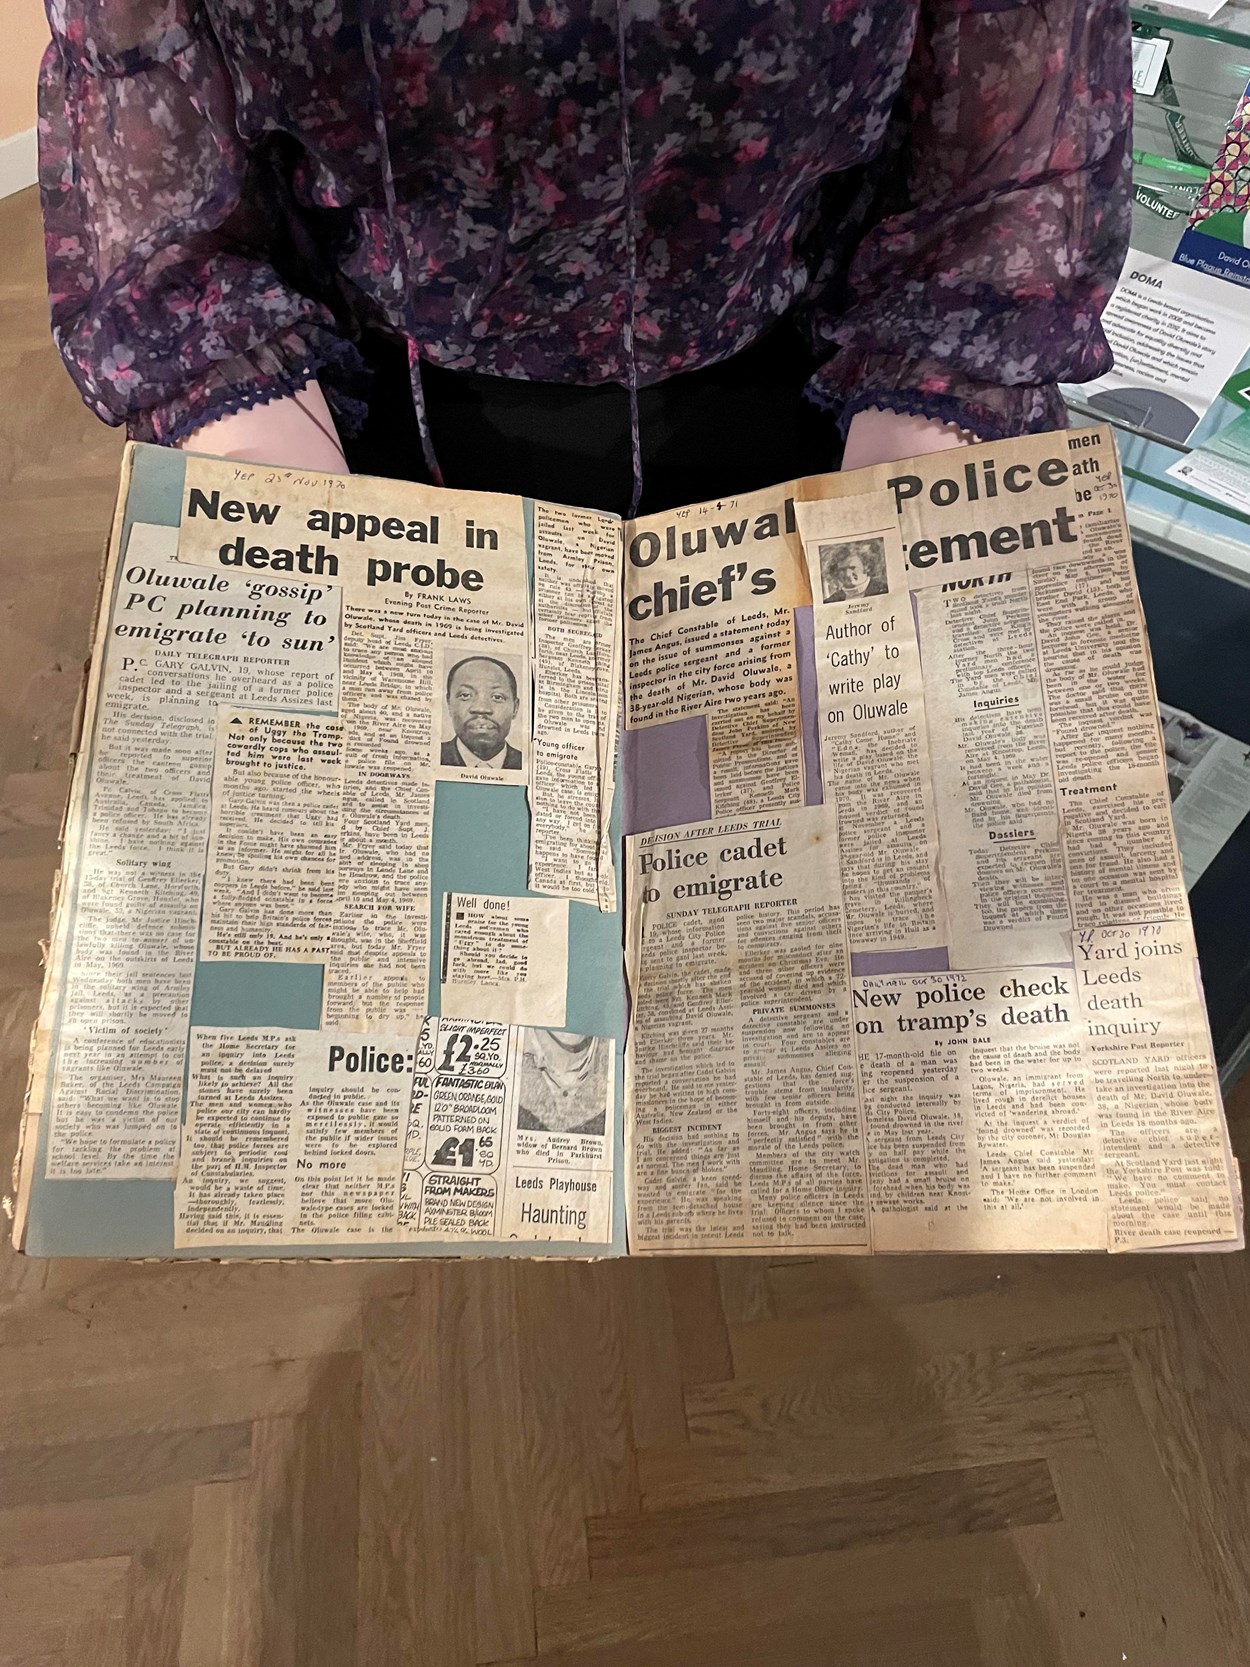 Overlooked: On display, on loan from the National Archives, will be a collection of documents including photographs and court records relating to David’s life and the police investigation into his death.
They include the original scrapbook created by Gary Galvin, the police officer who notified West Yorkshire Police of David’s abuse.